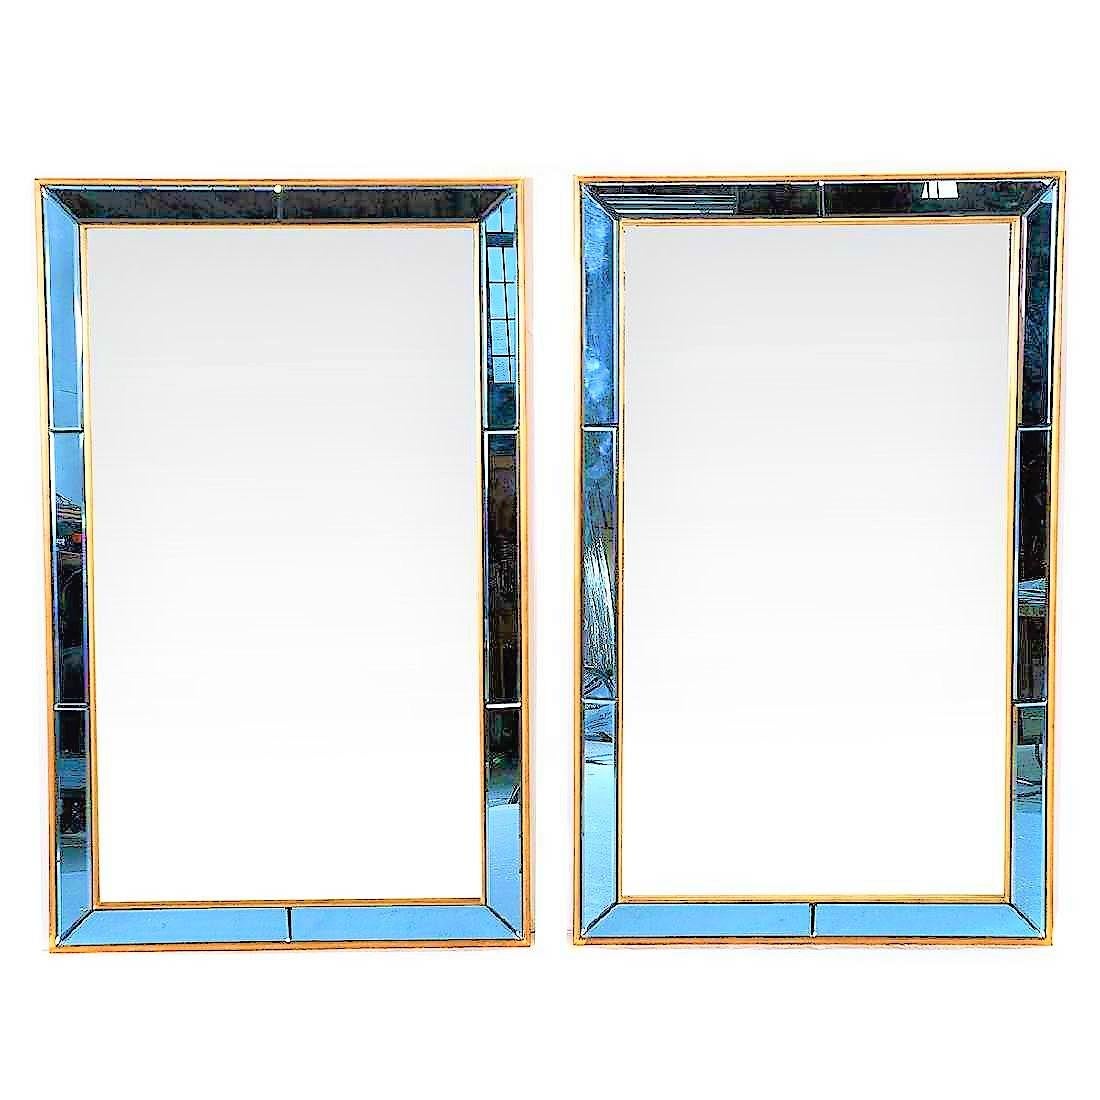 Pair of Neoclassical Styled Mirrors with Beveled Blue Mirror Surround Panes